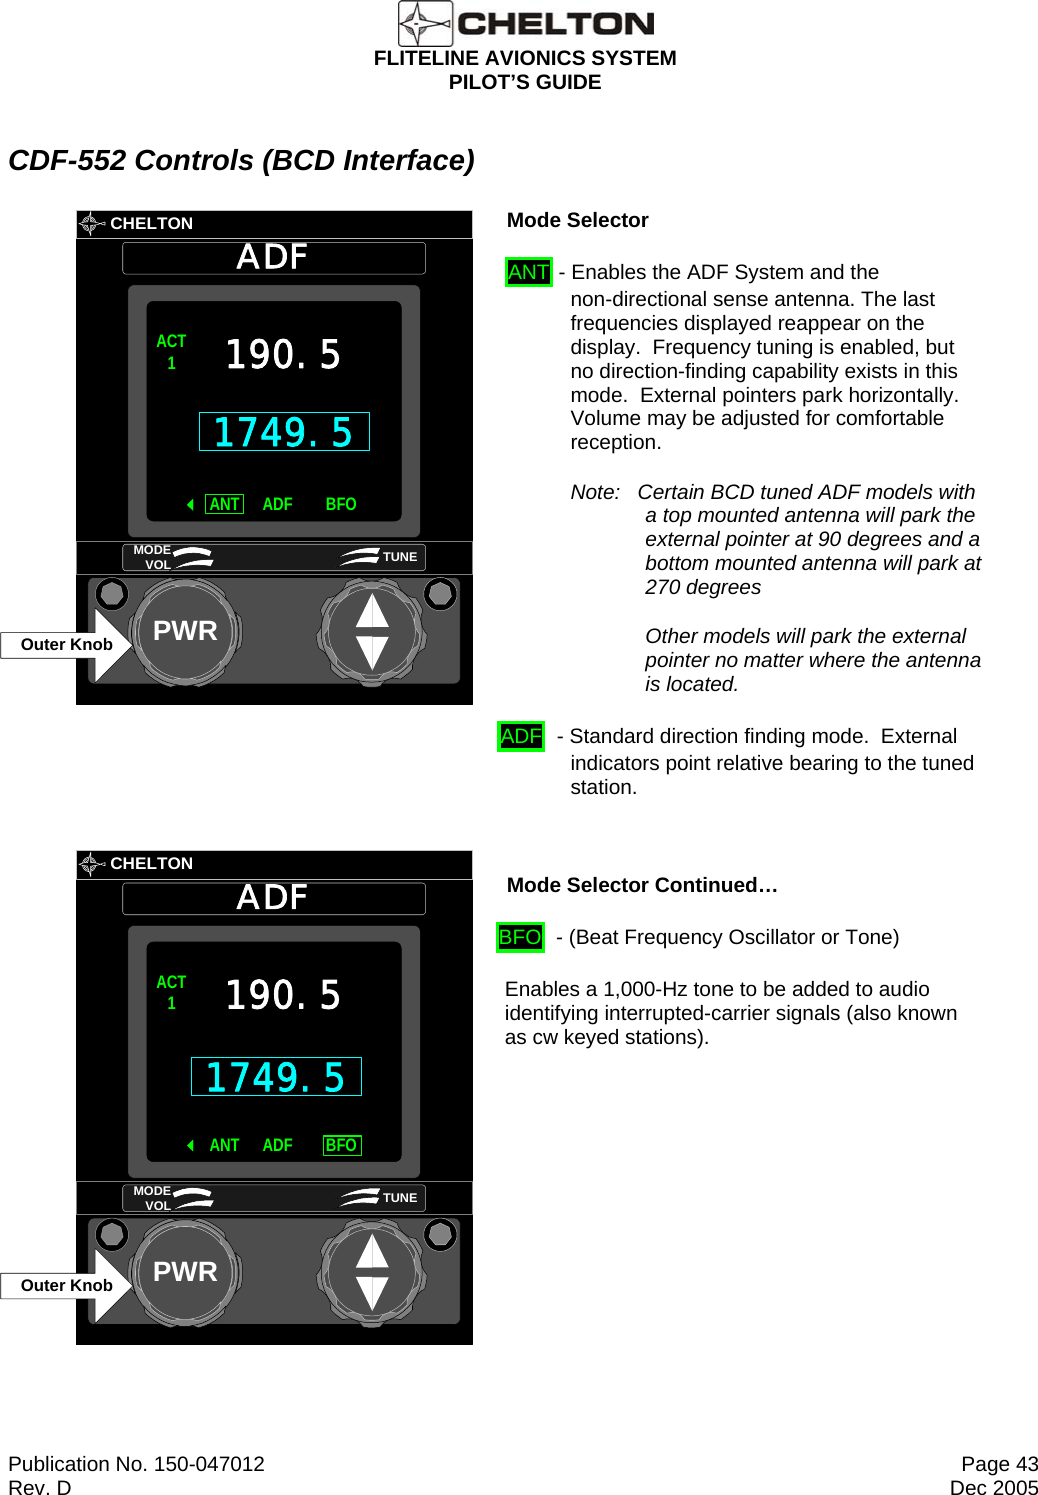  FLITELINE AVIONICS SYSTEM PILOT’S GUIDE  Publication No. 150-047012  Page 43 Rev. D  Dec 2005 CDF-552 Controls (BCD Interface)       CHELTONADFPWR1749.5ACT1ANT BFOADF190.5MODE VOL TUNEOuter Knob Mode Selector  ANT - Enables the ADF System and the non-directional sense antenna. The last frequencies displayed reappear on the display.  Frequency tuning is enabled, but no direction-finding capability exists in this mode.  External pointers park horizontally.  Volume may be adjusted for comfortable reception. Note:   Certain BCD tuned ADF models with a top mounted antenna will park the external pointer at 90 degrees and a bottom mounted antenna will park at 270 degrees Other models will park the external pointer no matter where the antenna is located. ADF  - Standard direction finding mode.  External indicators point relative bearing to the tuned station.        CHELTONADFPWRACT1ANT BFOADF190.5MODE VOL TUNEOuter Knob1749.5 Mode Selector Continued… BFO  - (Beat Frequency Oscillator or Tone)  Enables a 1,000-Hz tone to be added to audio identifying interrupted-carrier signals (also known as cw keyed stations).  